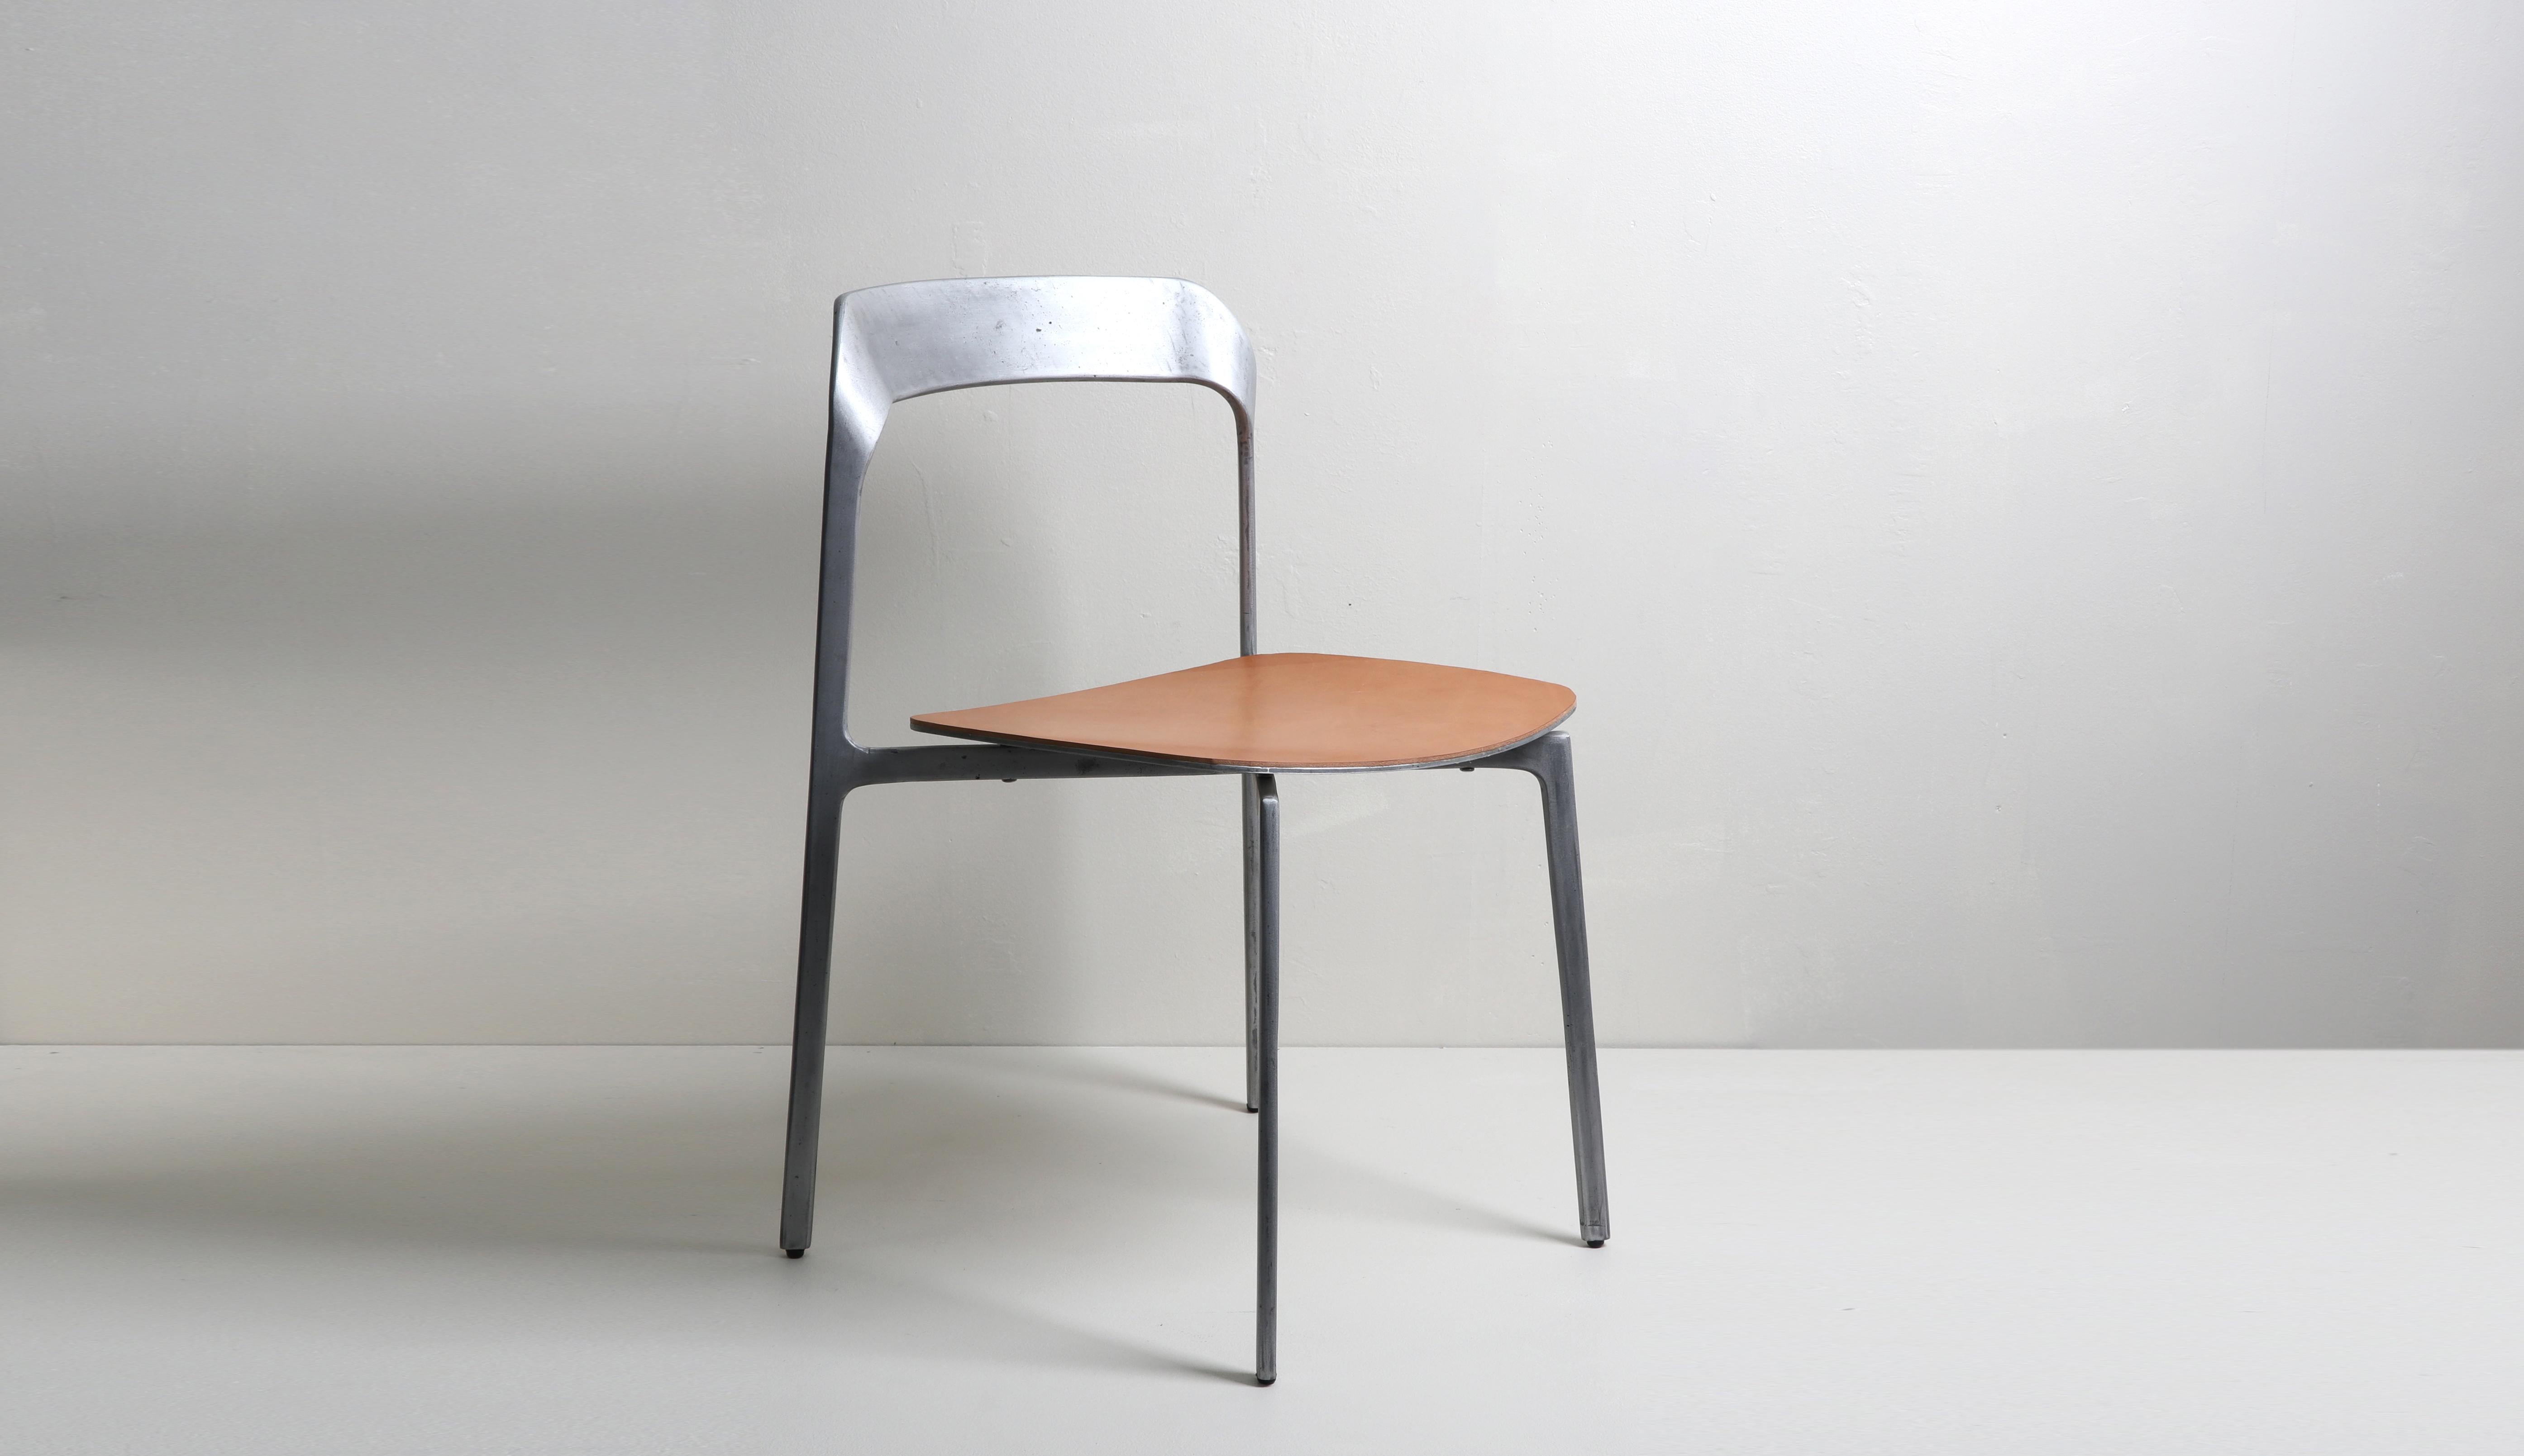 Blurb studio chair by Tom Fereday
Dimensions: W 57 x D 44 x H 77 cm
Materials: sand cast aluminium, eclaimed hide leather, natural tan
eucalyptus black


Tom Fereday develops products based on the principle of honest design, conveying a design